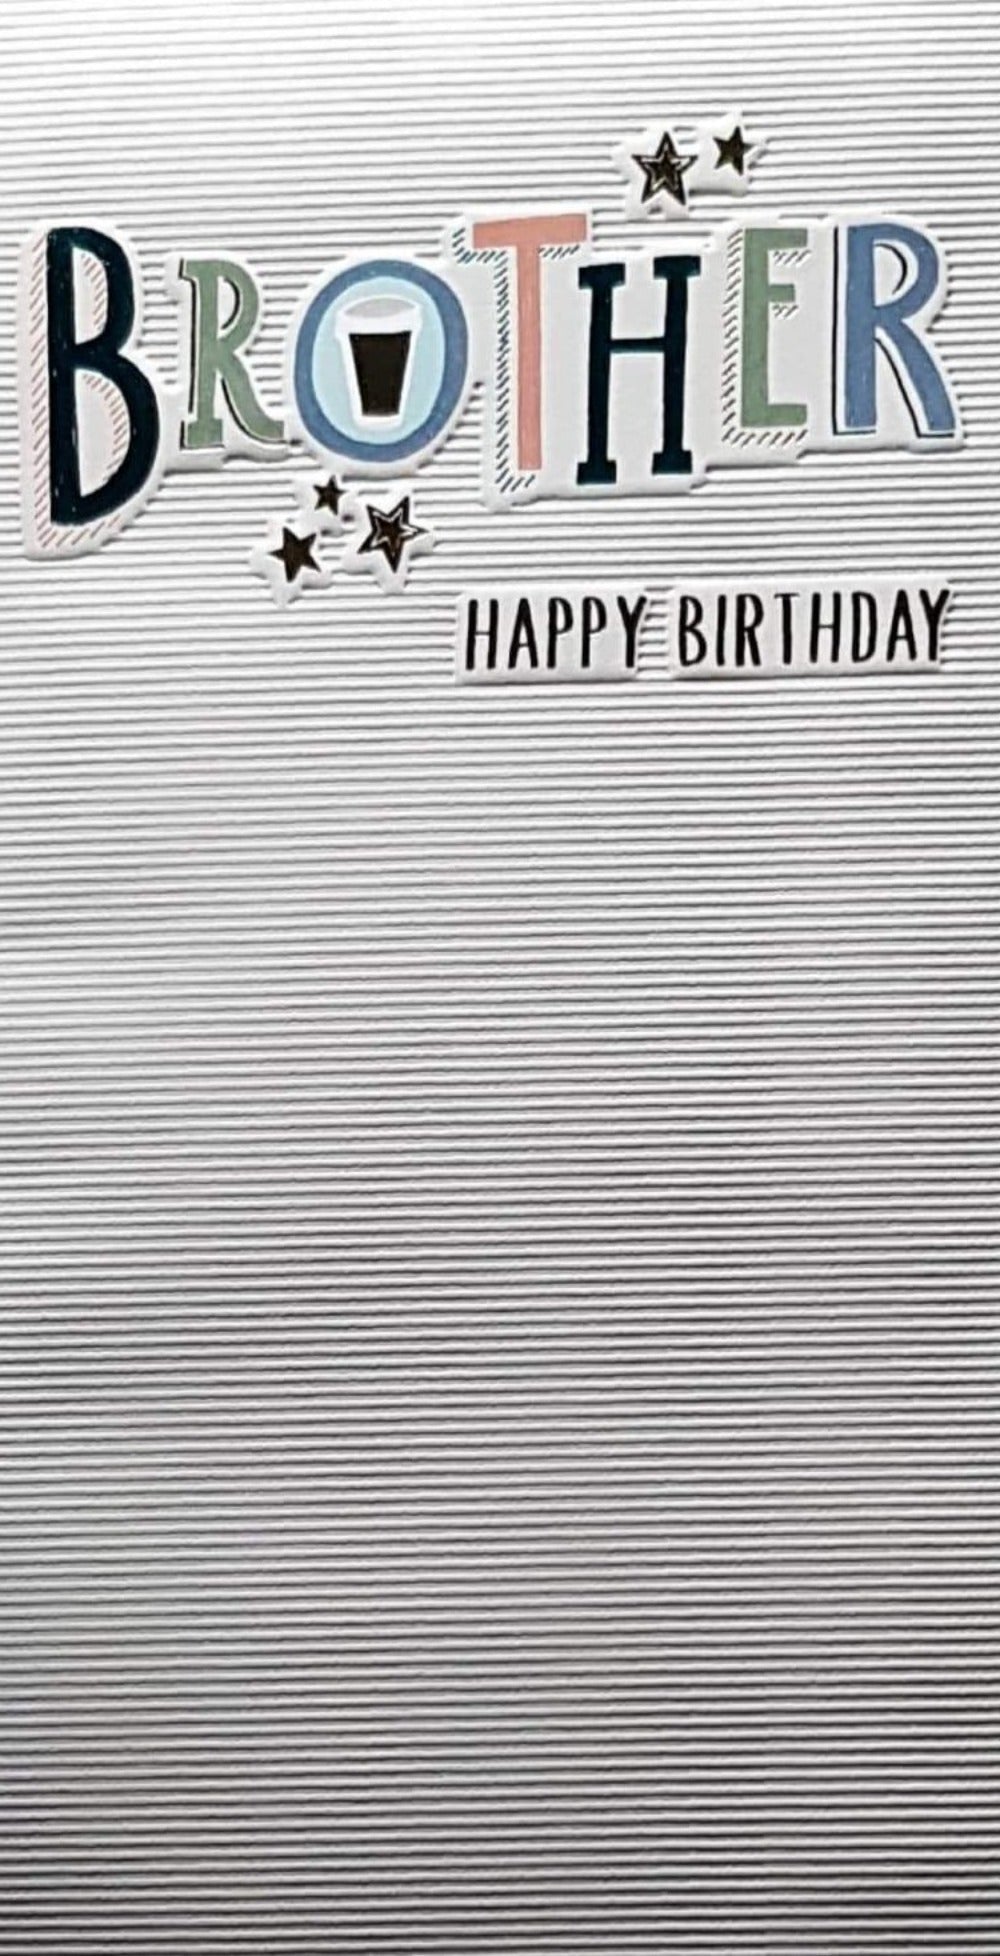 Birthday Card - Brother / A Striped Paper